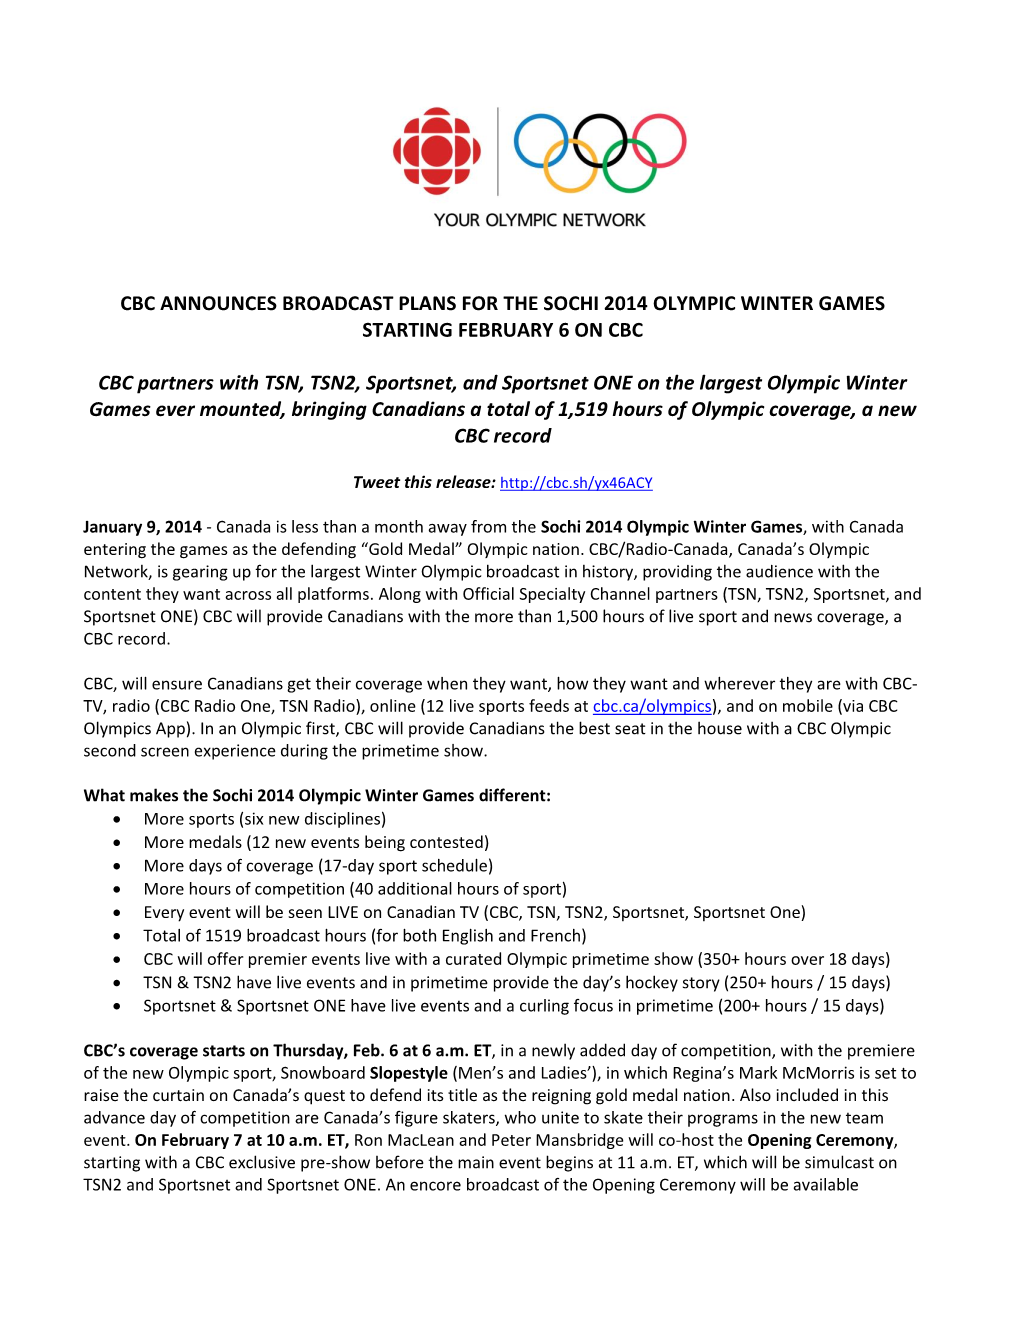 Cbc Announces Broadcast Plans for the Sochi 2014 Olympic Winter Games Starting February 6 on Cbc